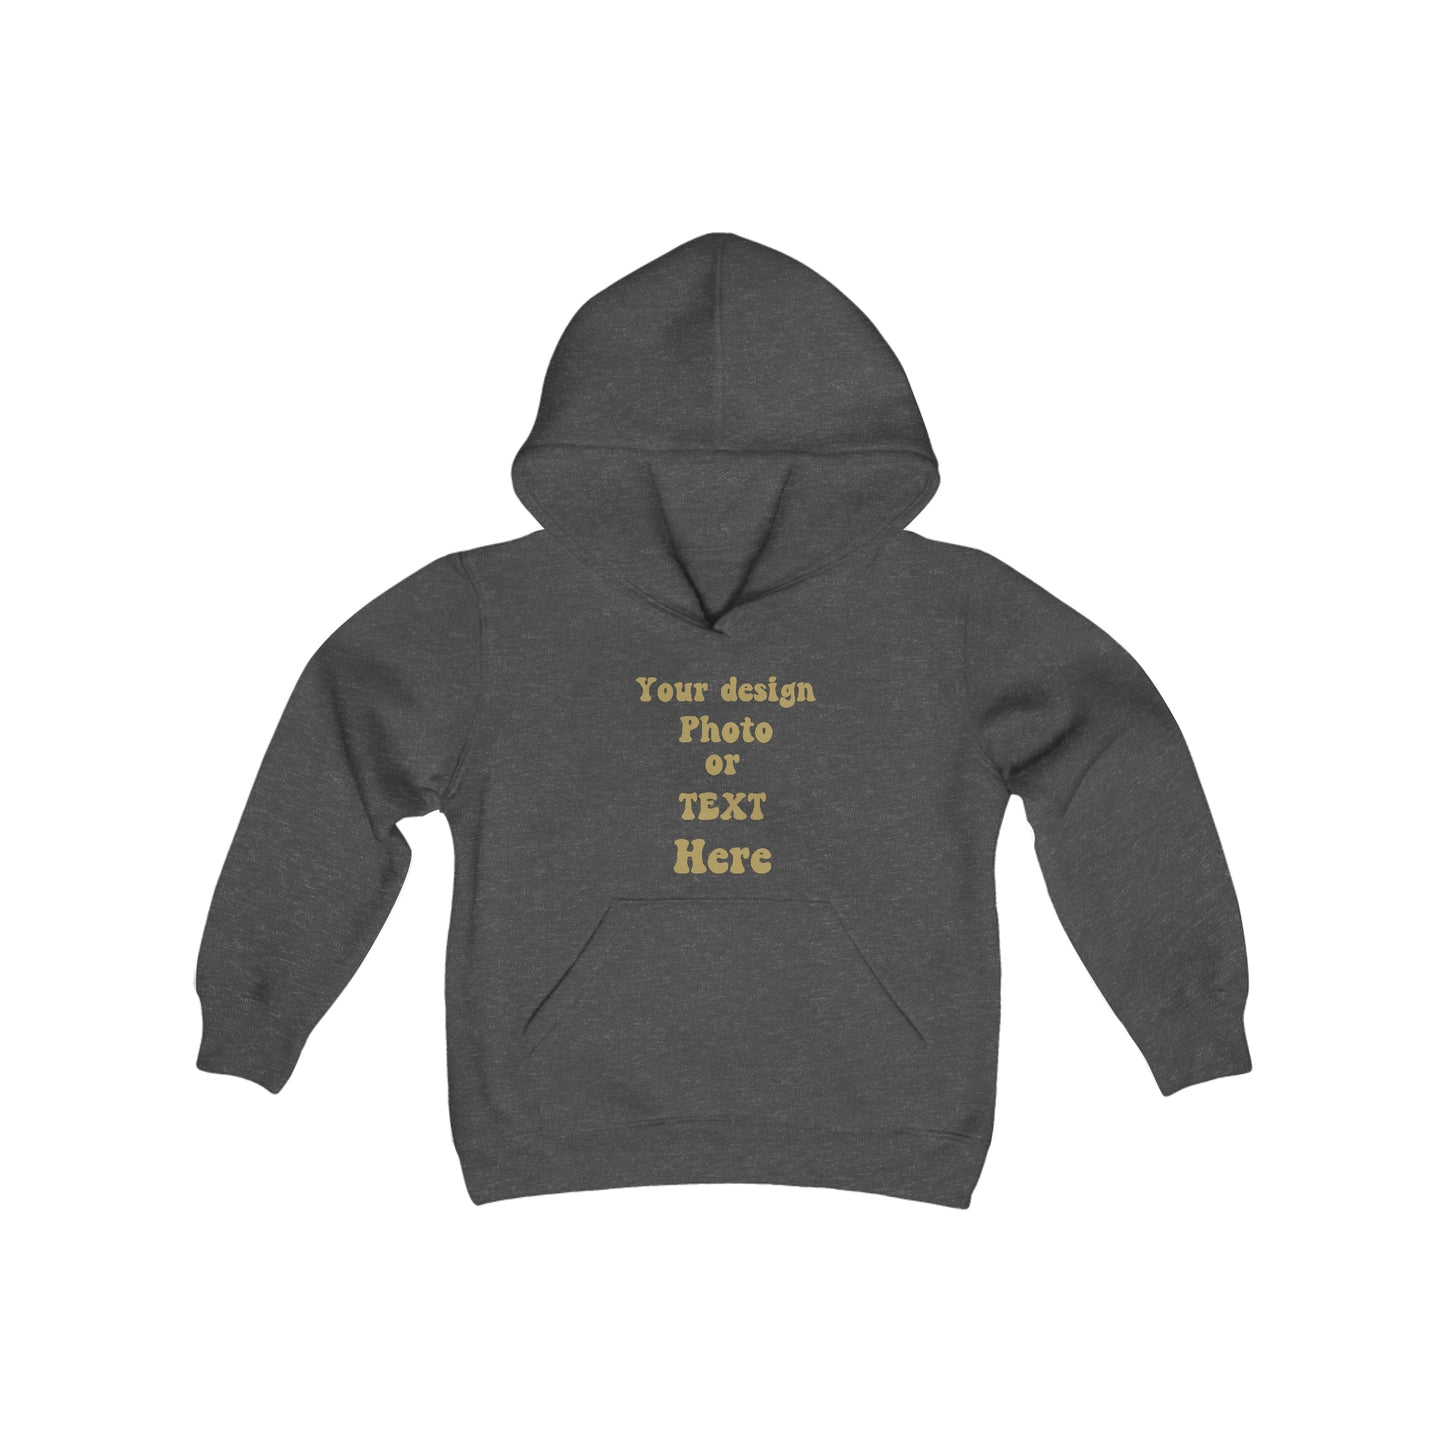 Youth Heavy Blend Hooded Sweatshirt - Personalize It with Text and Photo Kids clothes Dark Heather S 